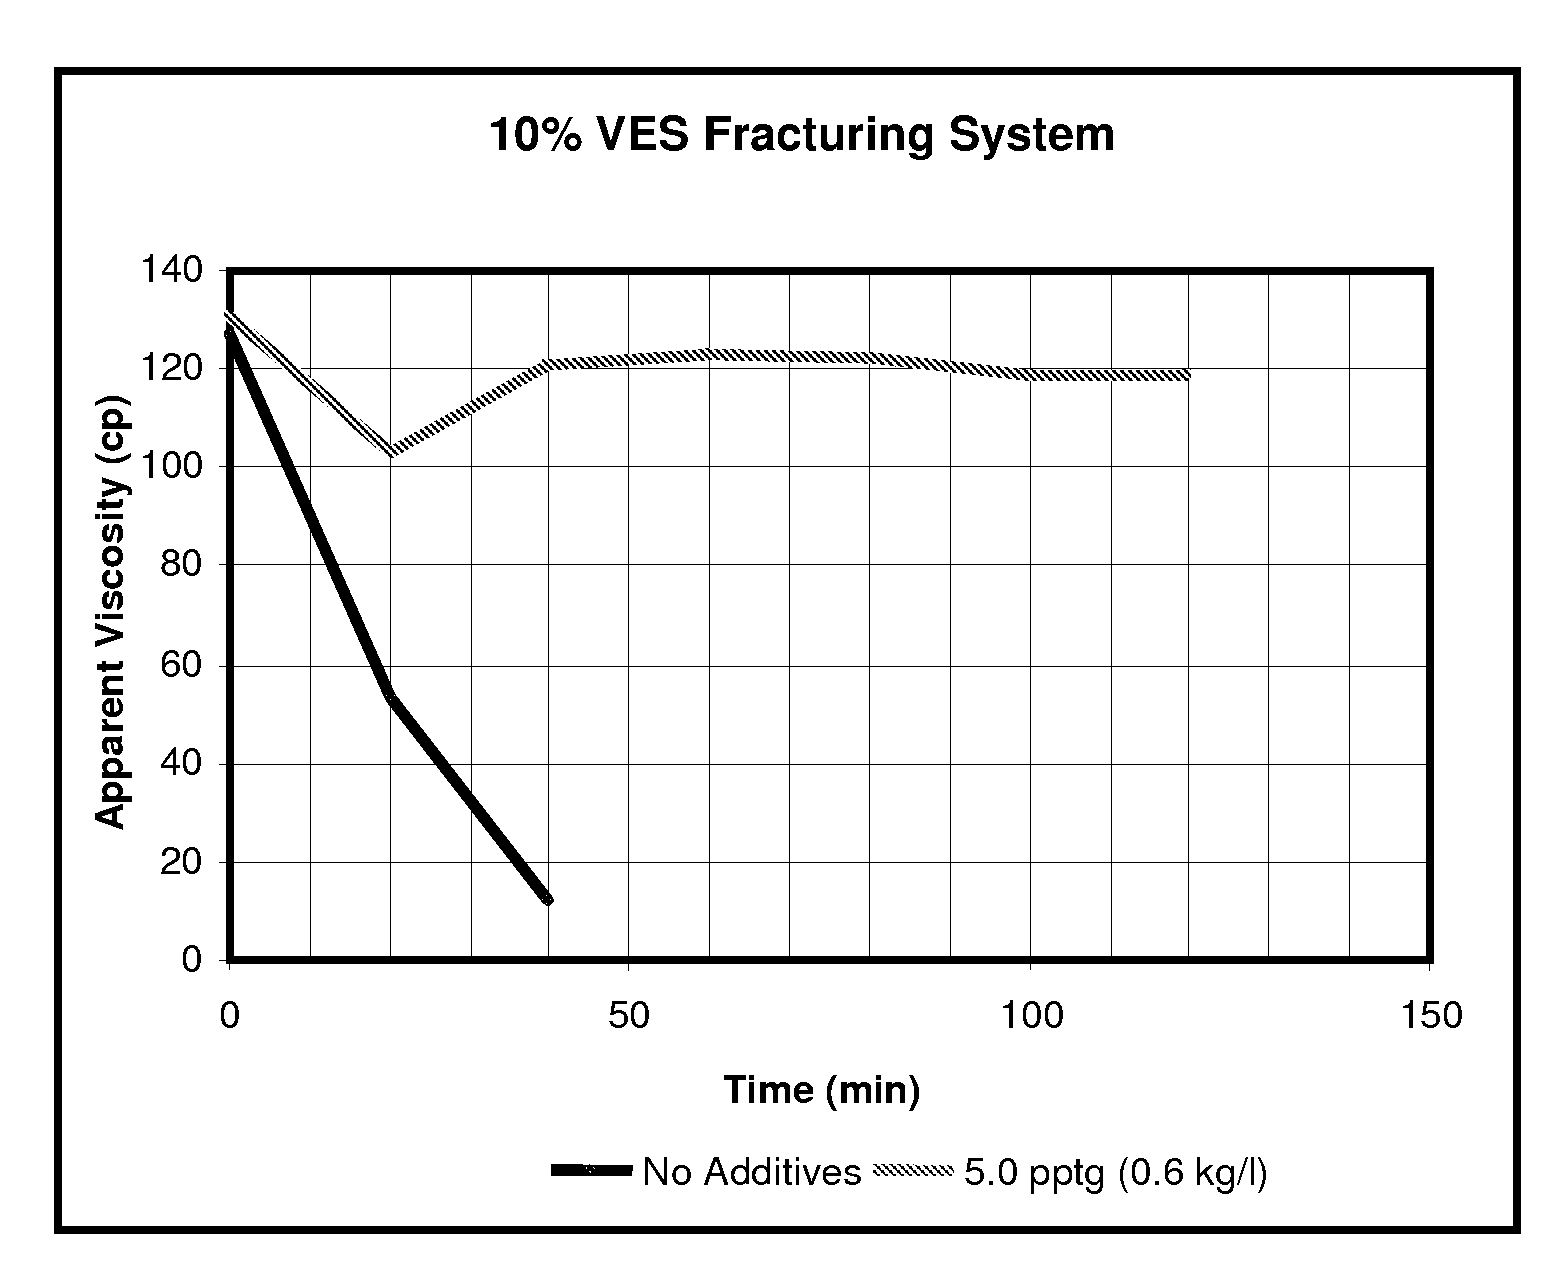 System stabilizers and performance enhancers for aqueous fluids gelled with viscoelastic surfactants